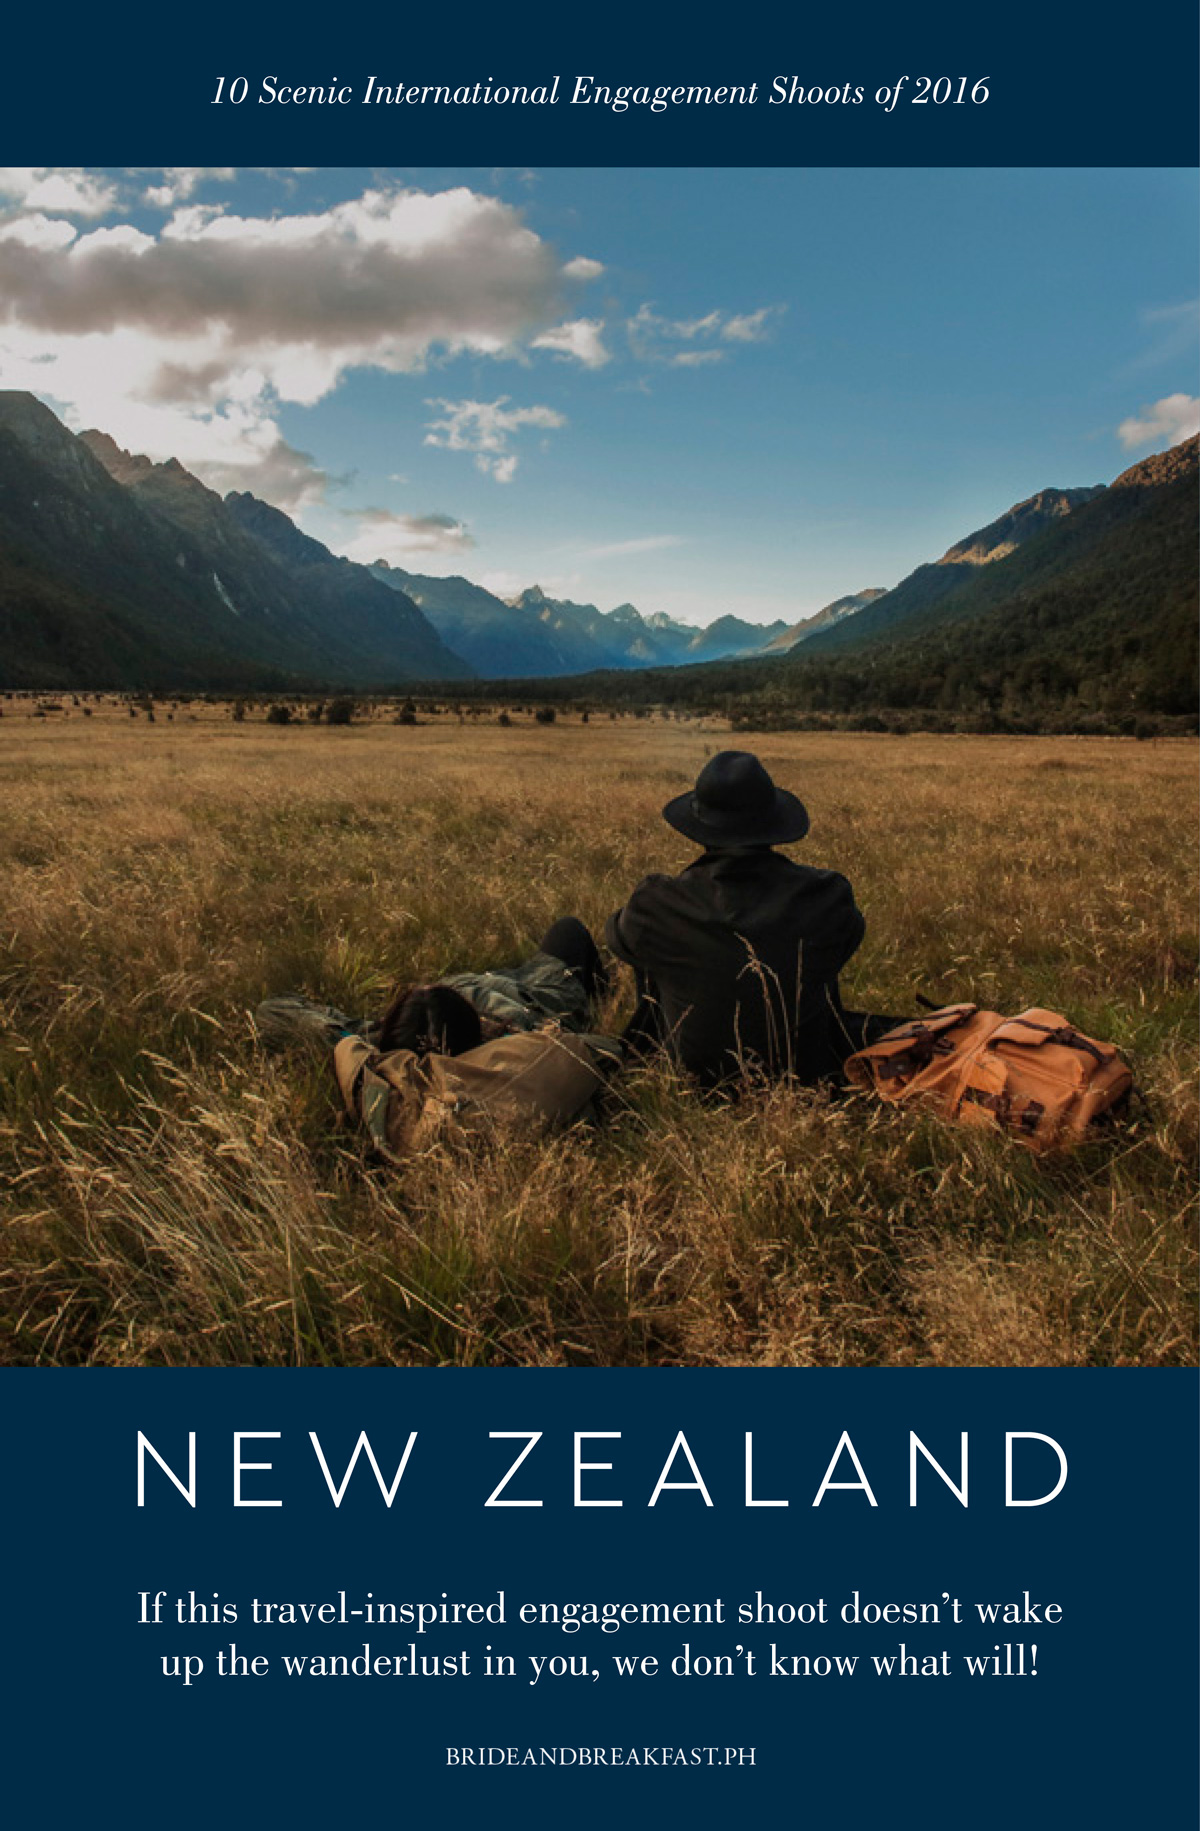 5. New Zealand If this travel-inspired engagement shoot doesn't wake up the wanderlust in you, we don't know what will!